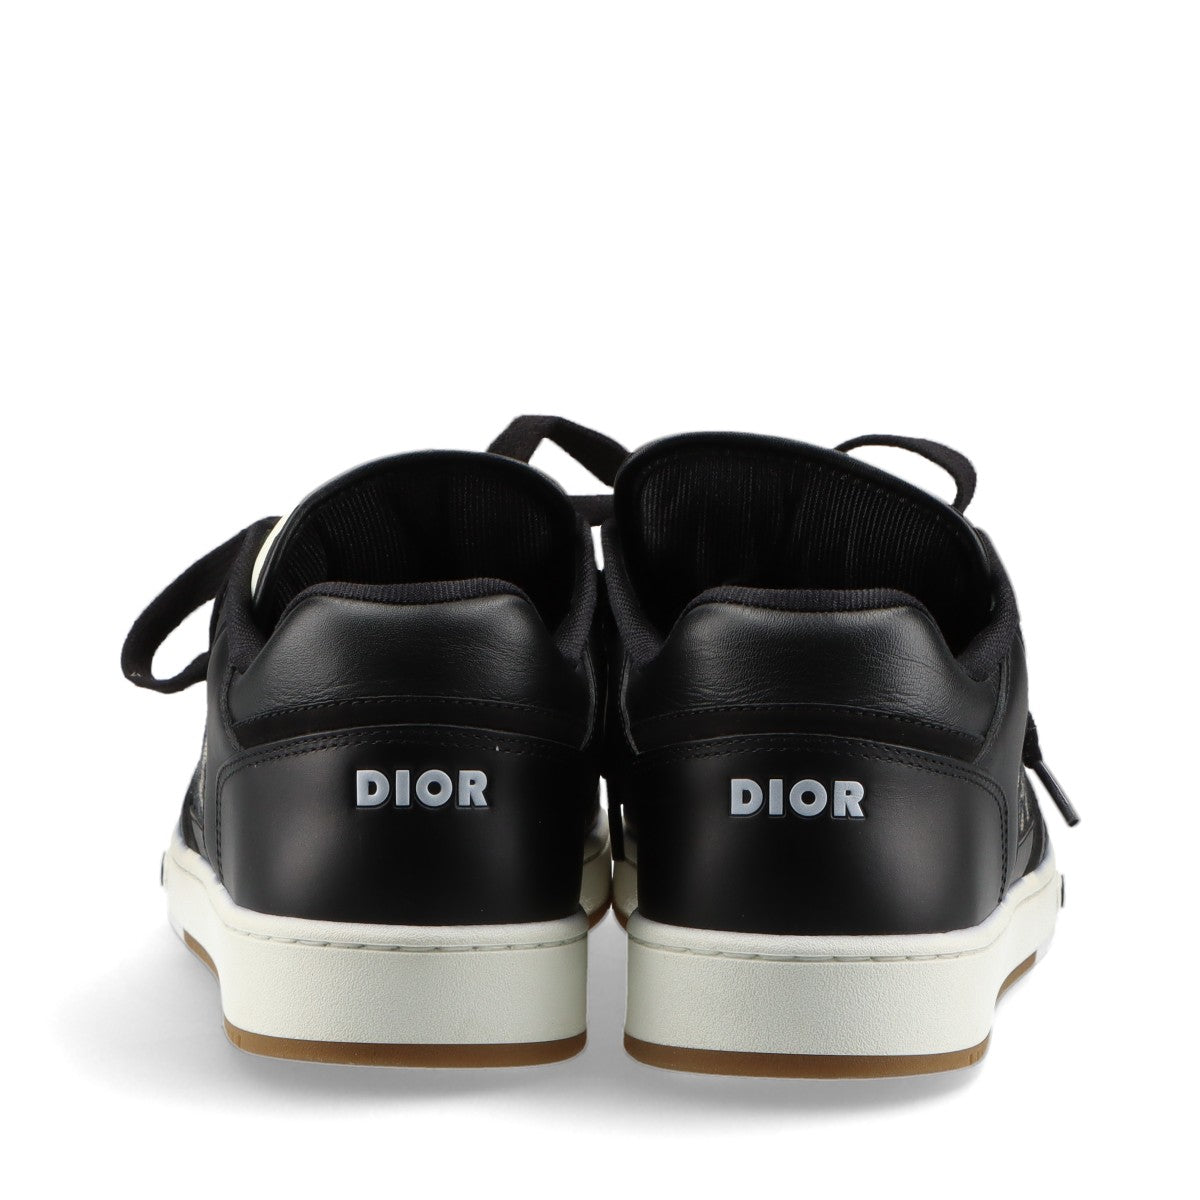 Dior B27 Leather x fabric Sneakers EU43 Men's Black x Beige DC1120 Oblique Replaceable cord Box Included